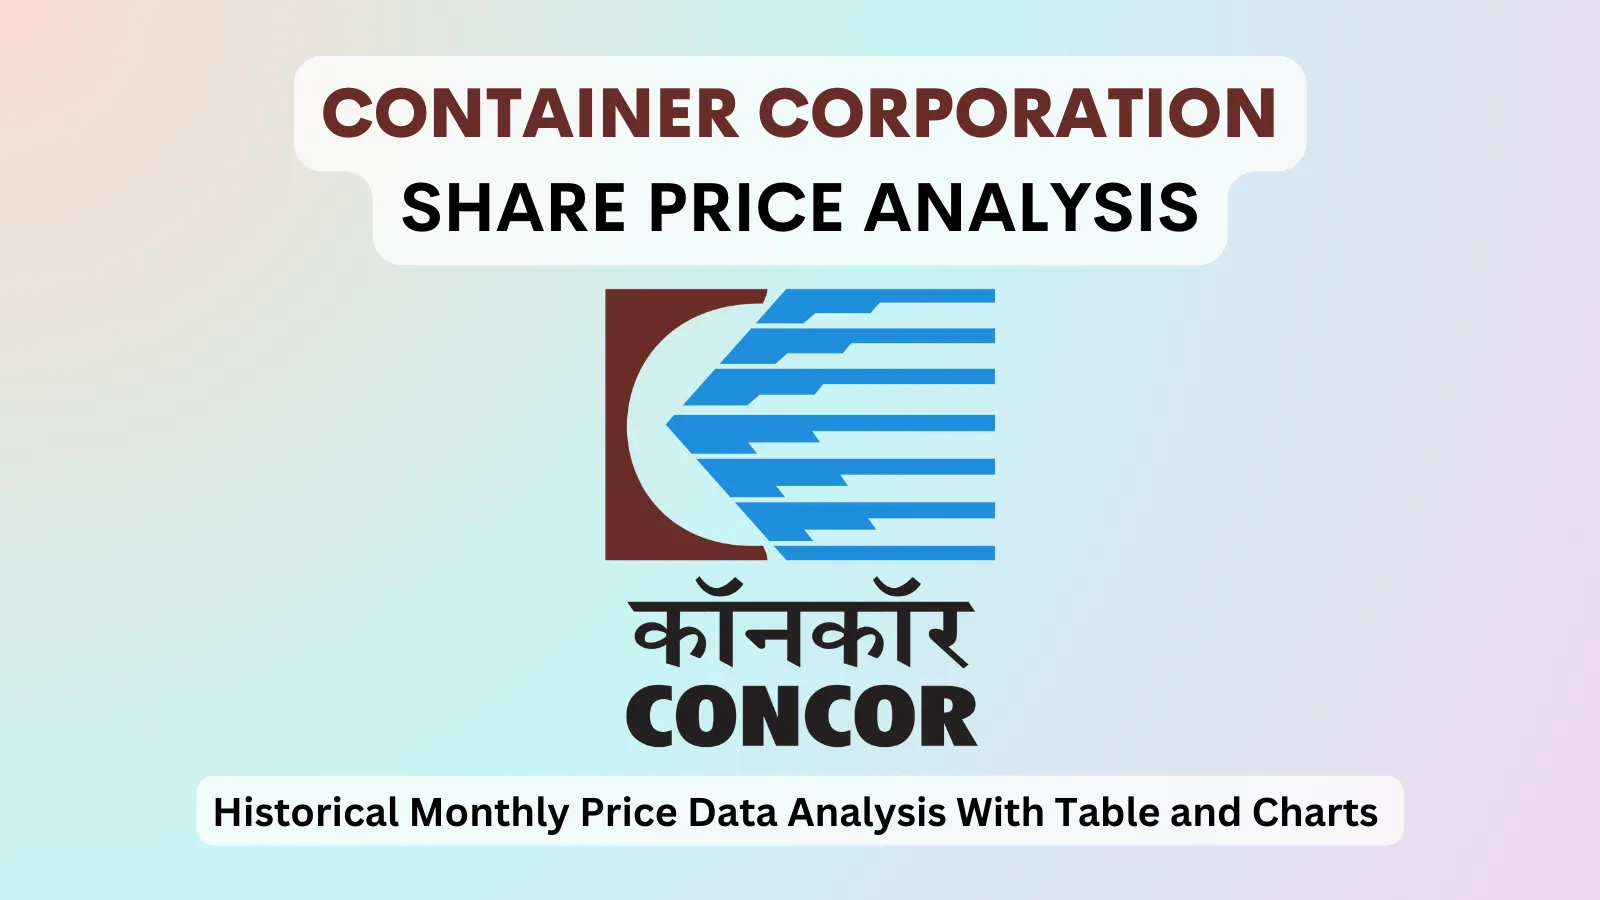 Container Corp share price analysis 1